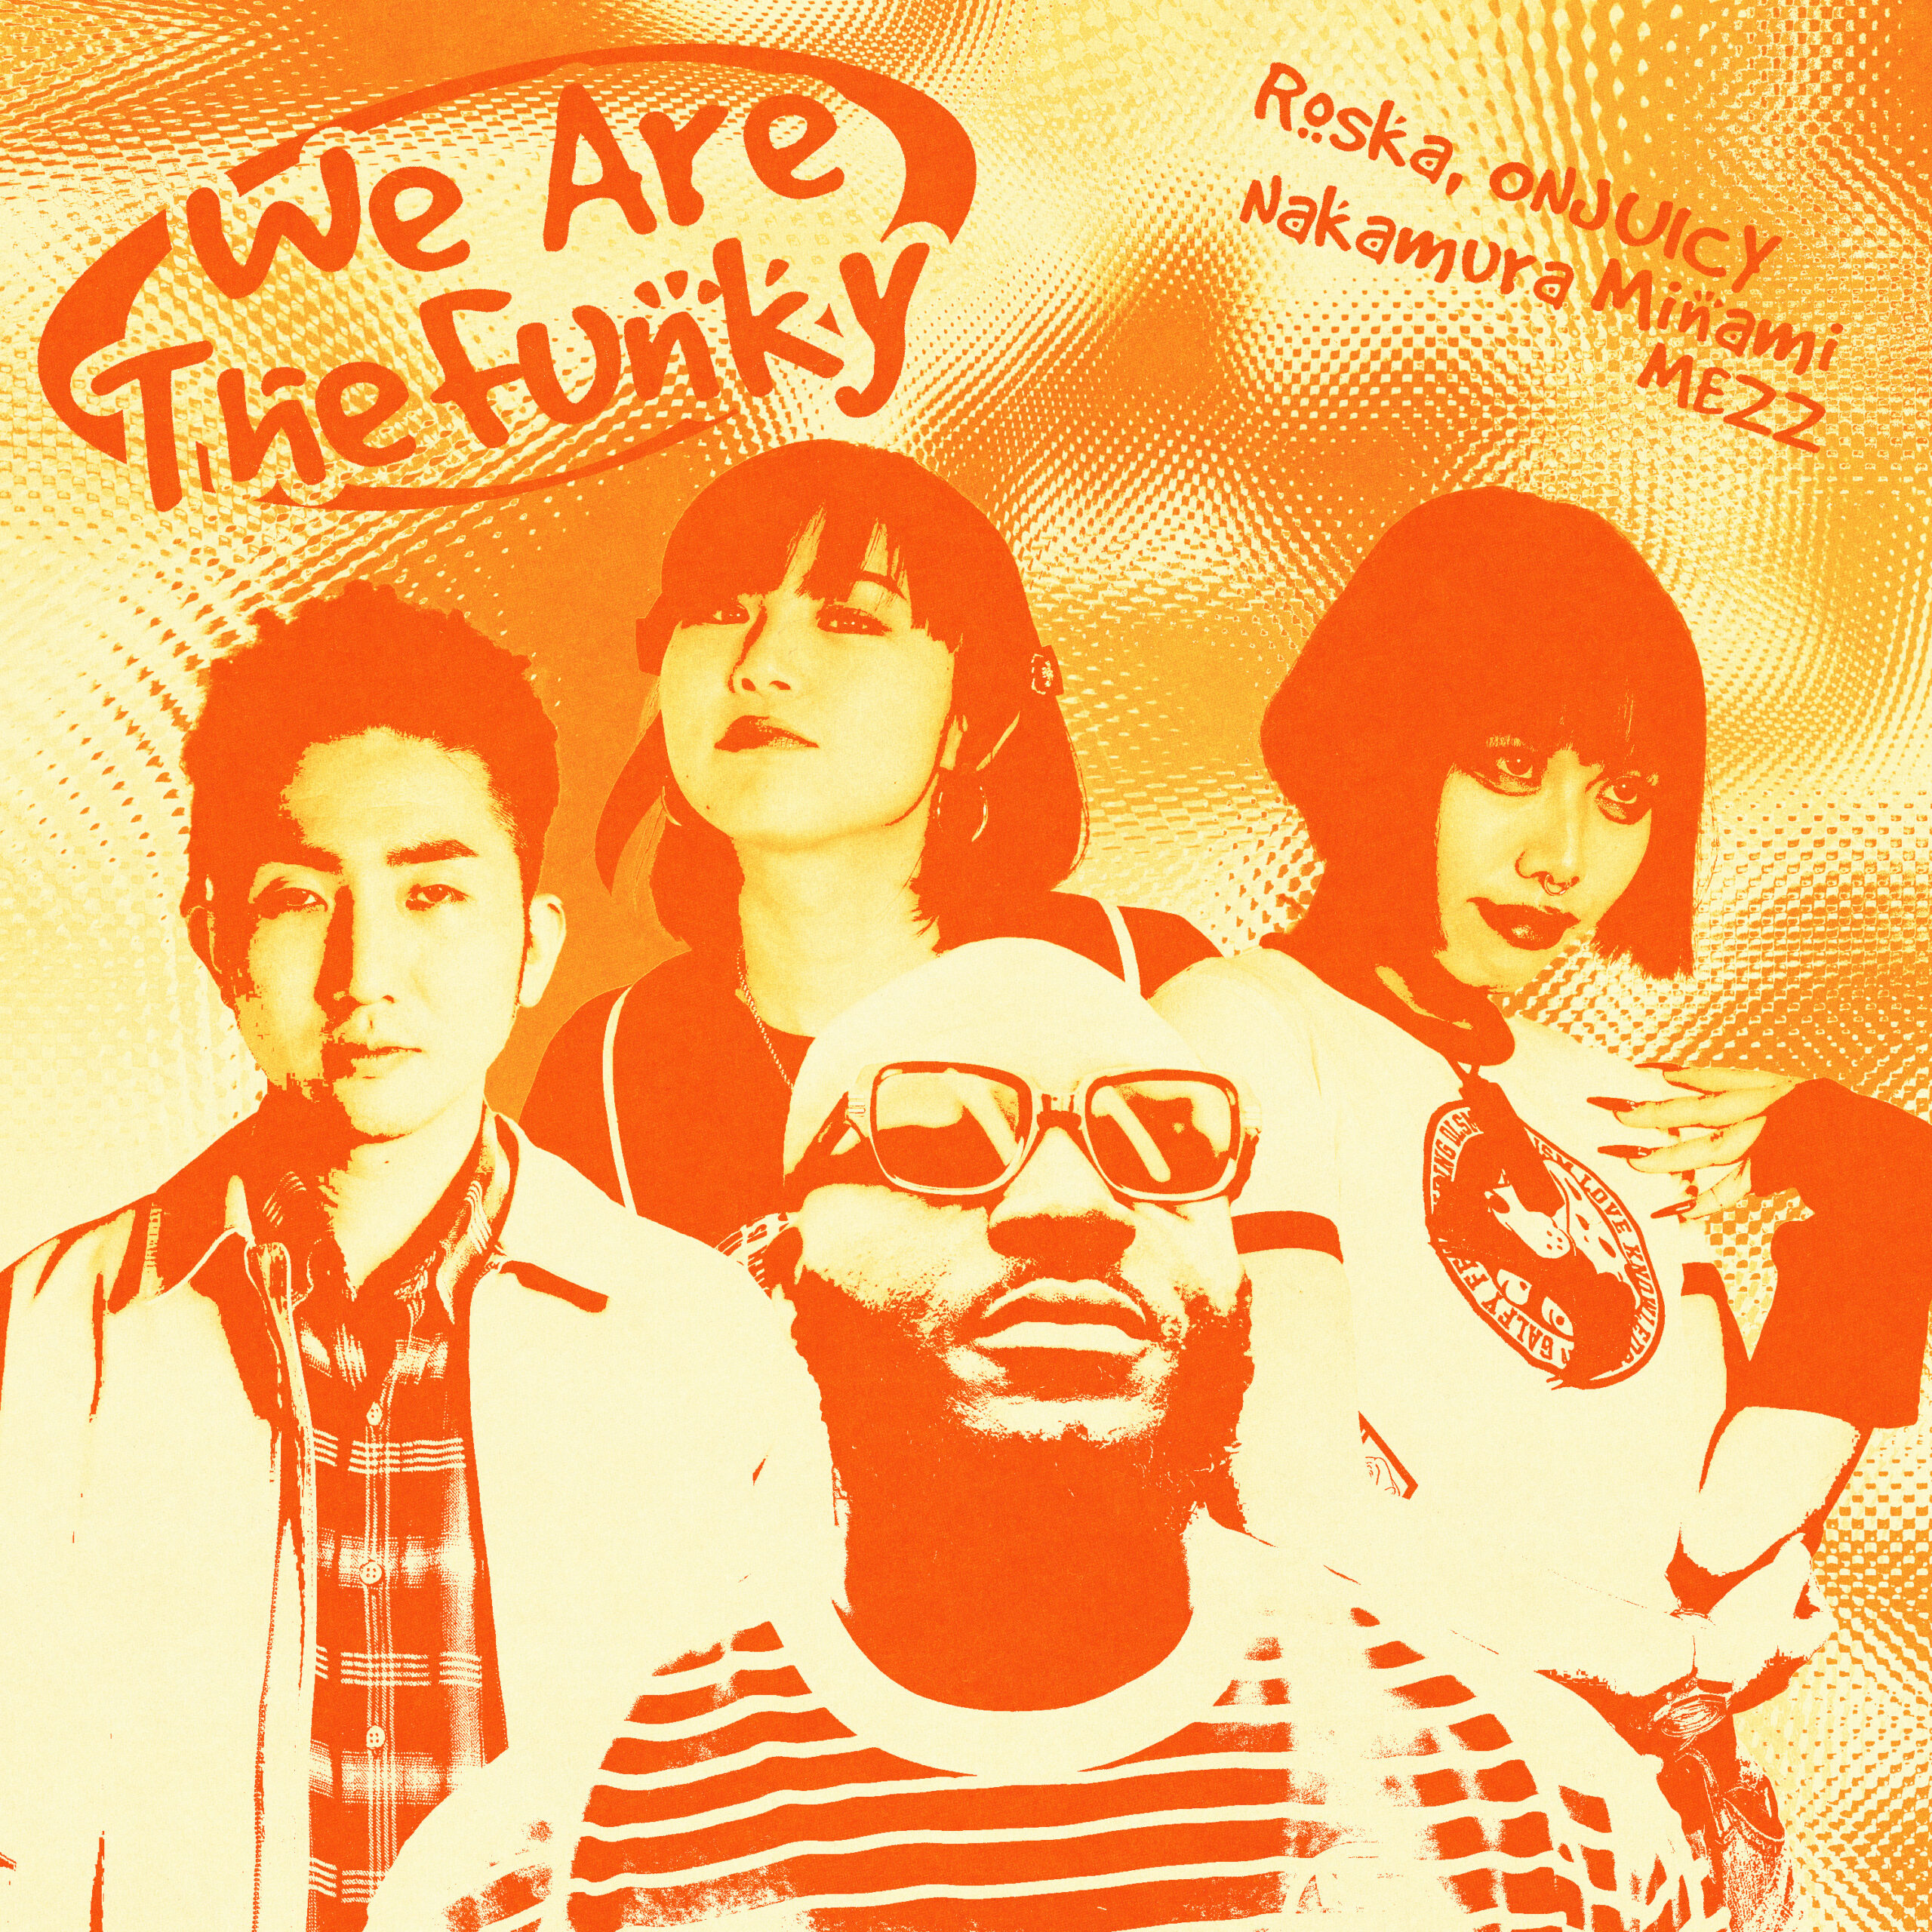 We are the funky